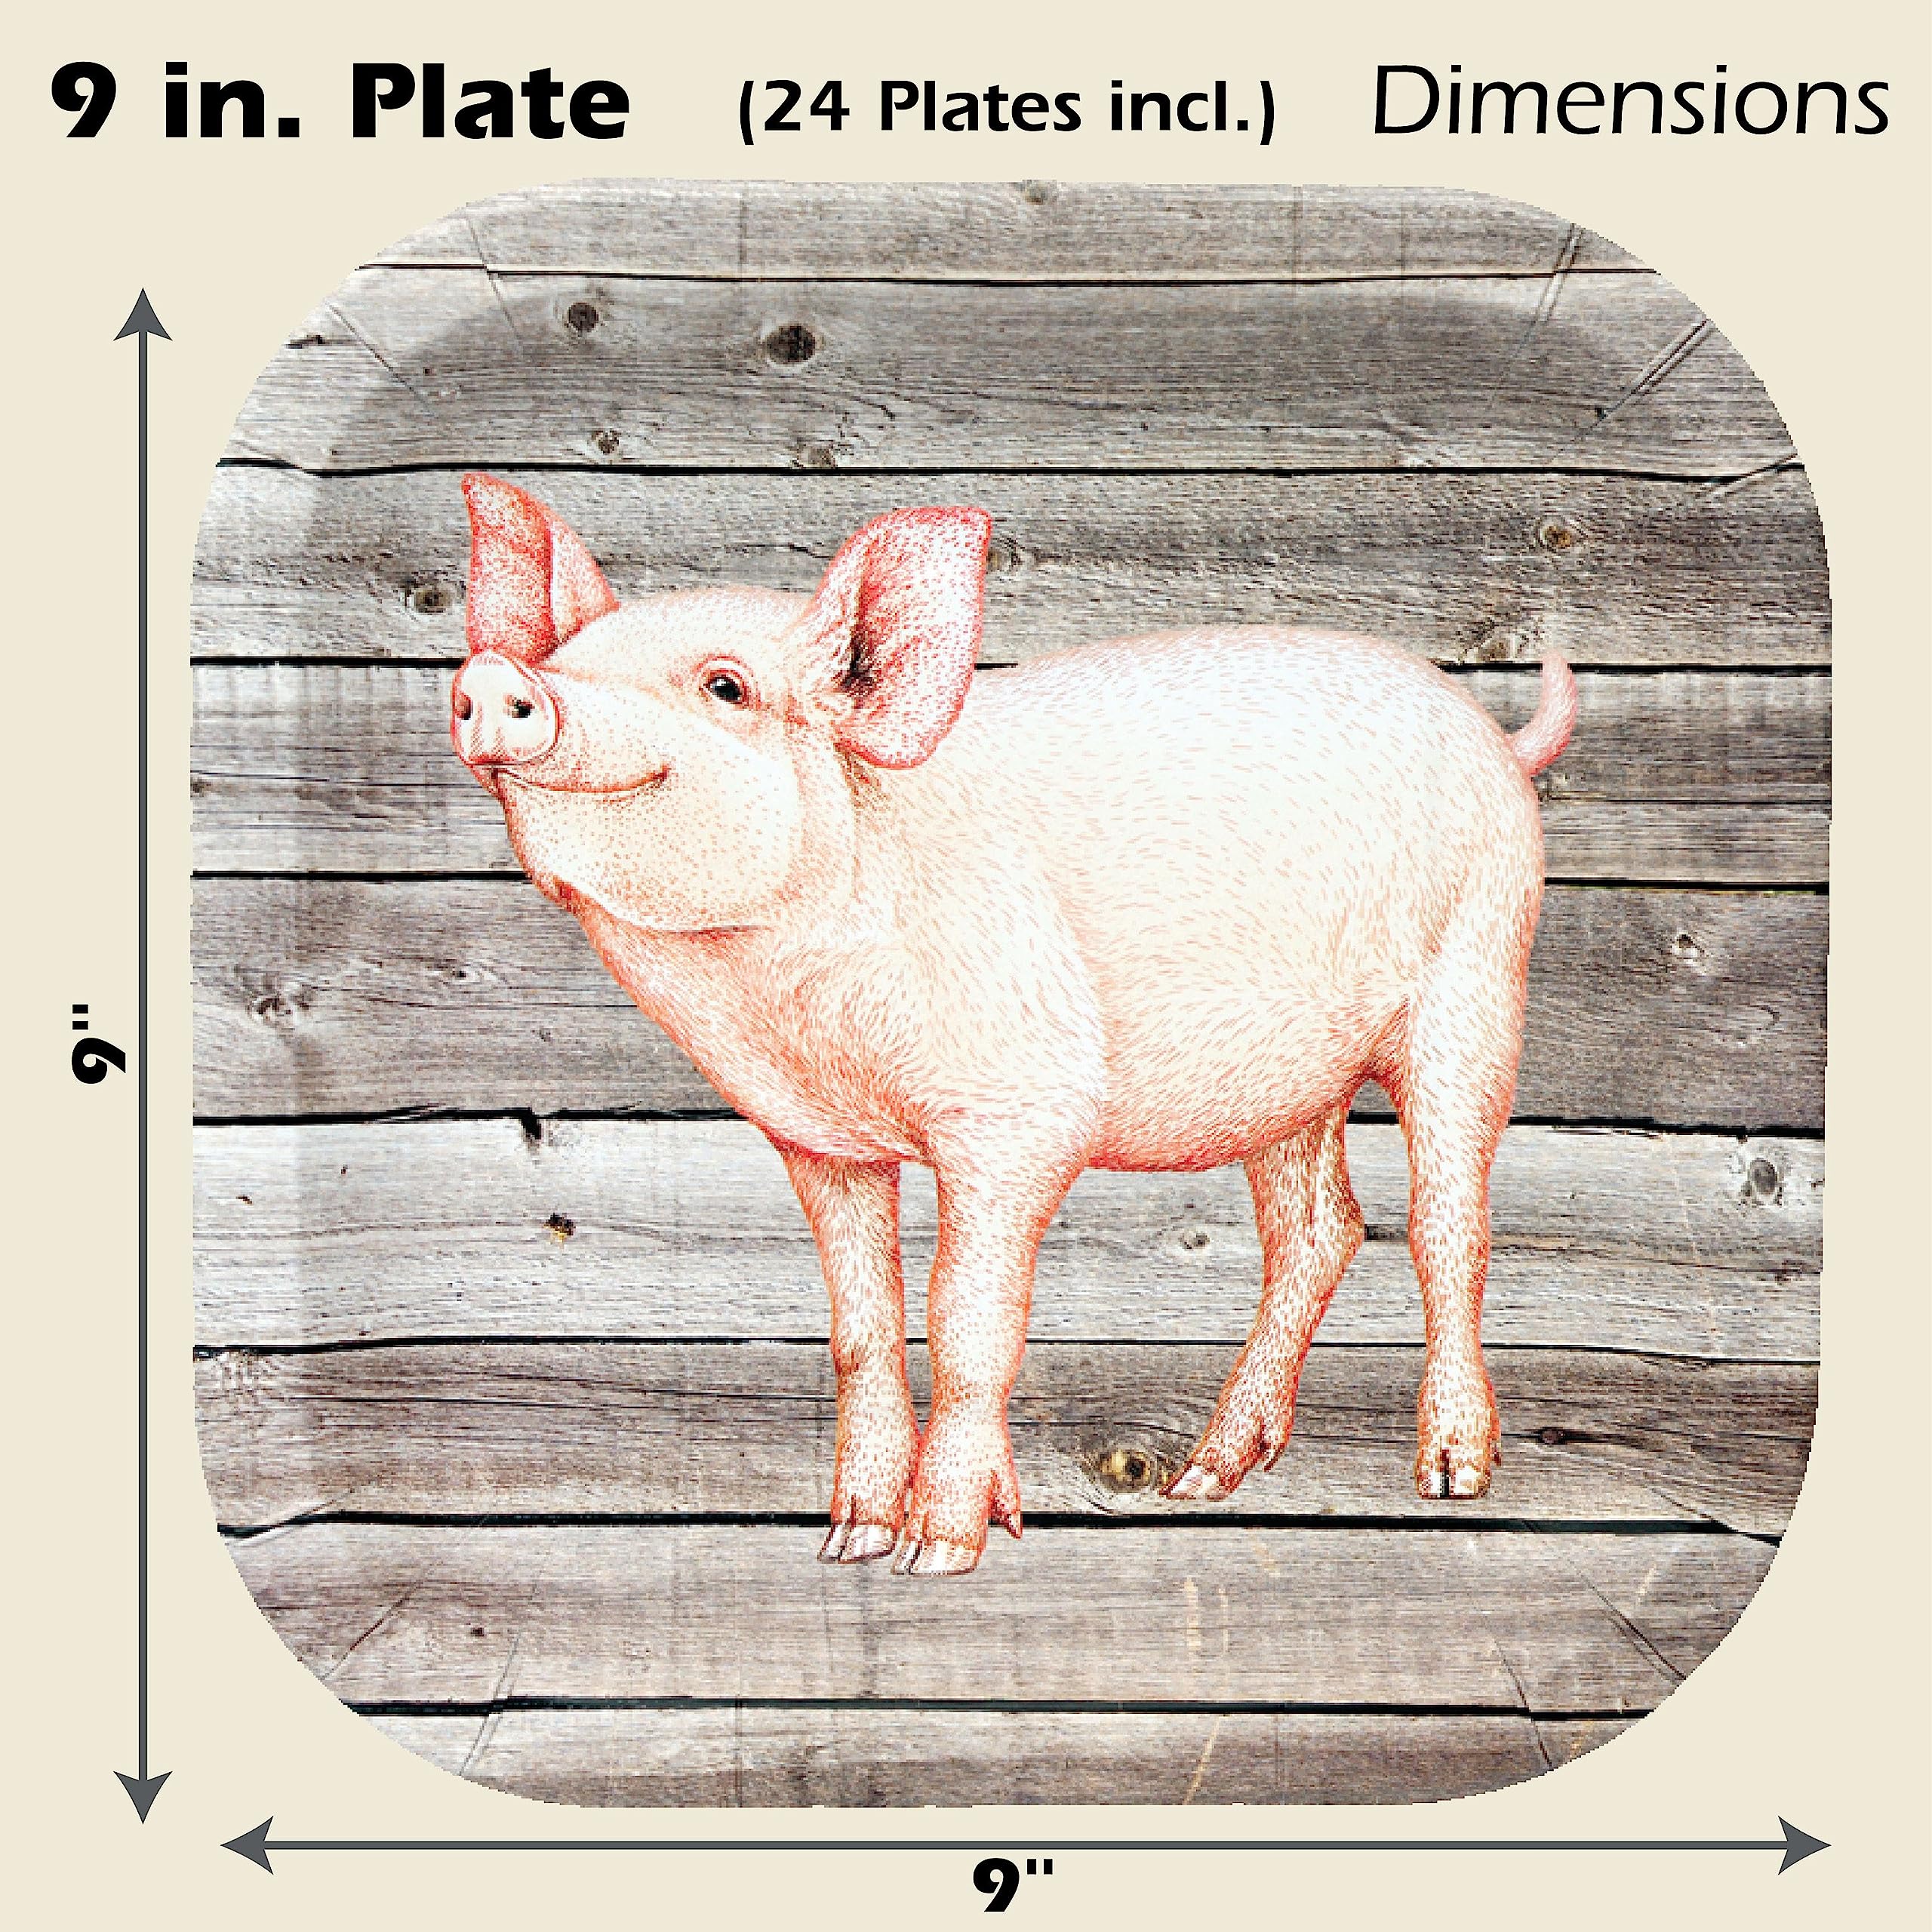 Havercamp Pig 9” Plates on Barnwood (24 pcs.)! Authentic and Cute Pig on a Rustic Barnwood Background. 24 Lg. 9 in. Square Dinner Plates. Pair with the Farm Table Collection!